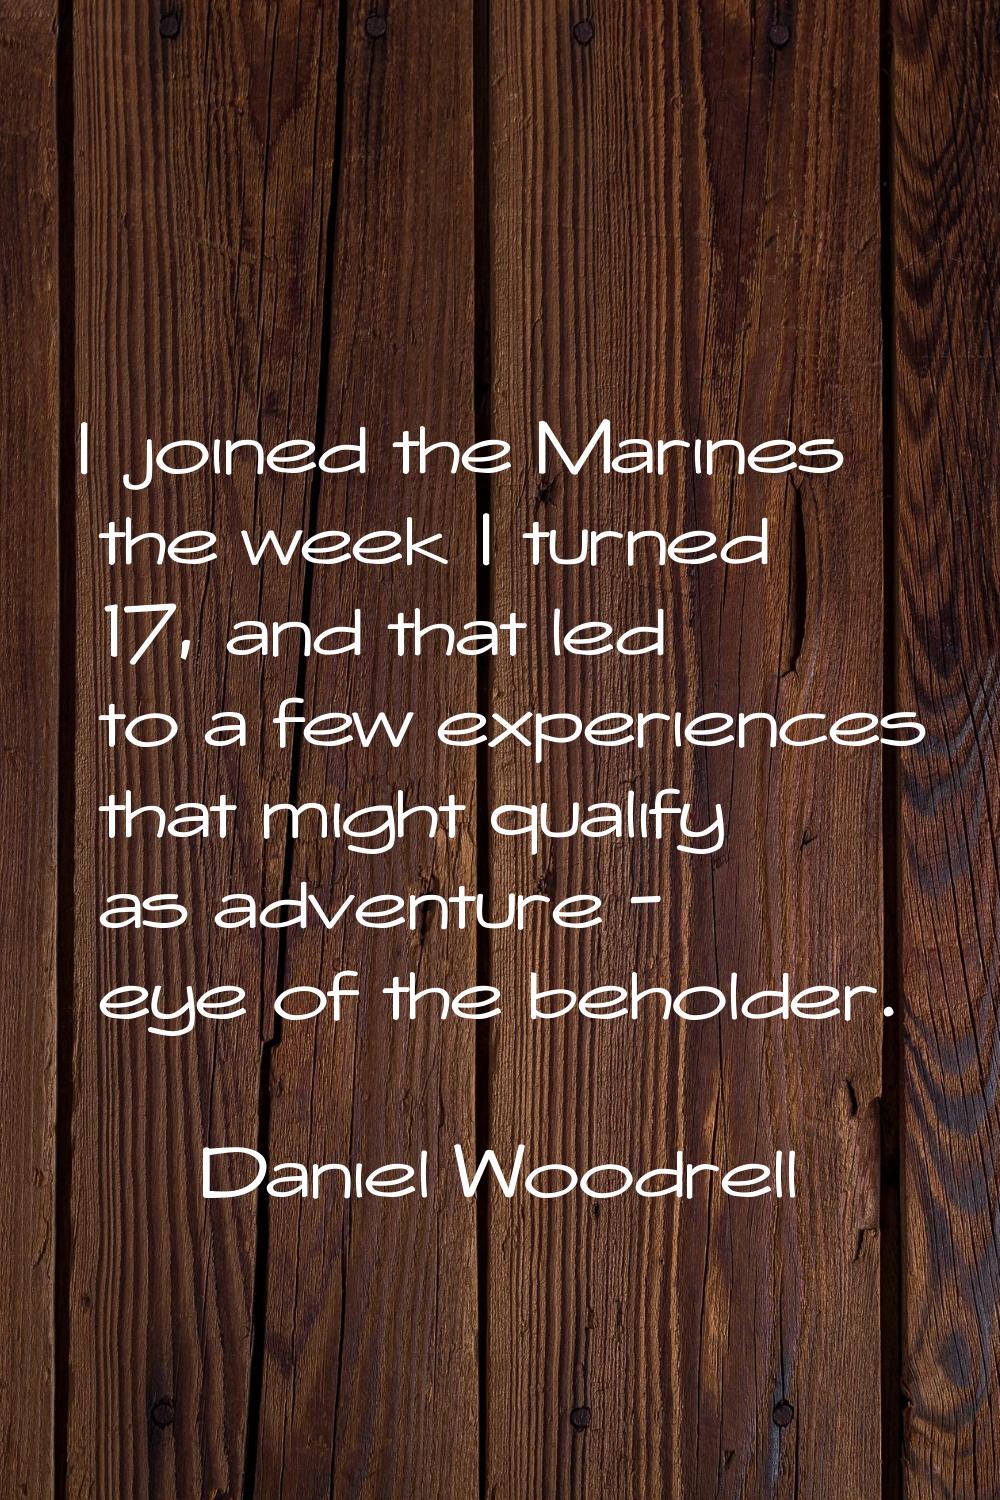 I joined the Marines the week I turned 17, and that led to a few experiences that might qualify as 